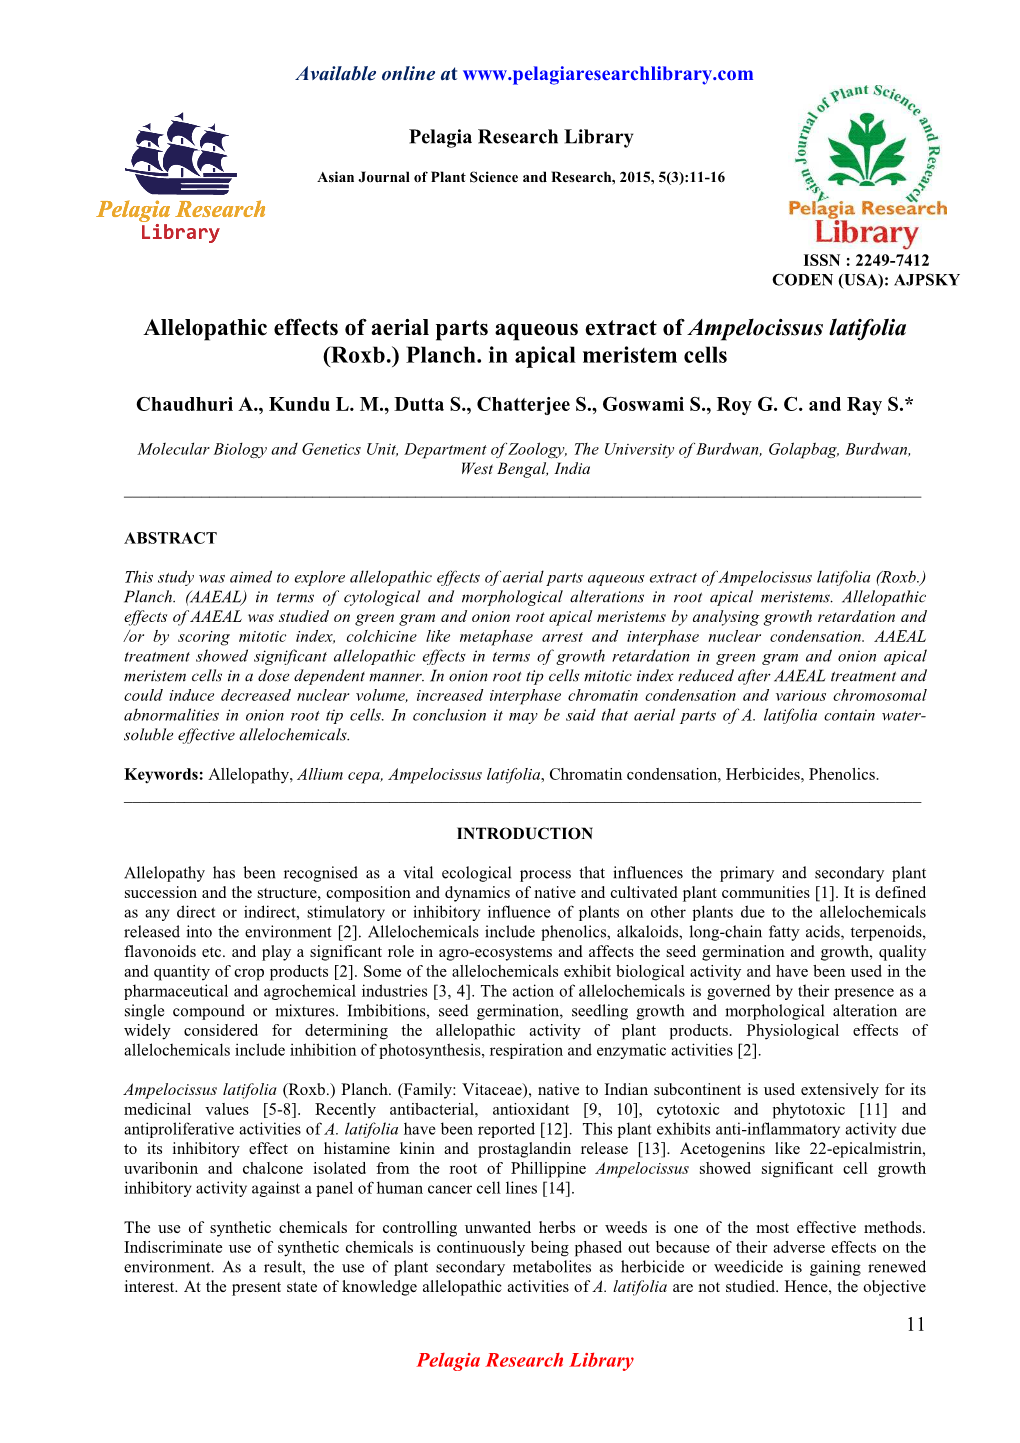 Allelopathic Effects of Aerial Parts Aqueous Extract of Ampelocissus Latifolia (Roxb.) Planch